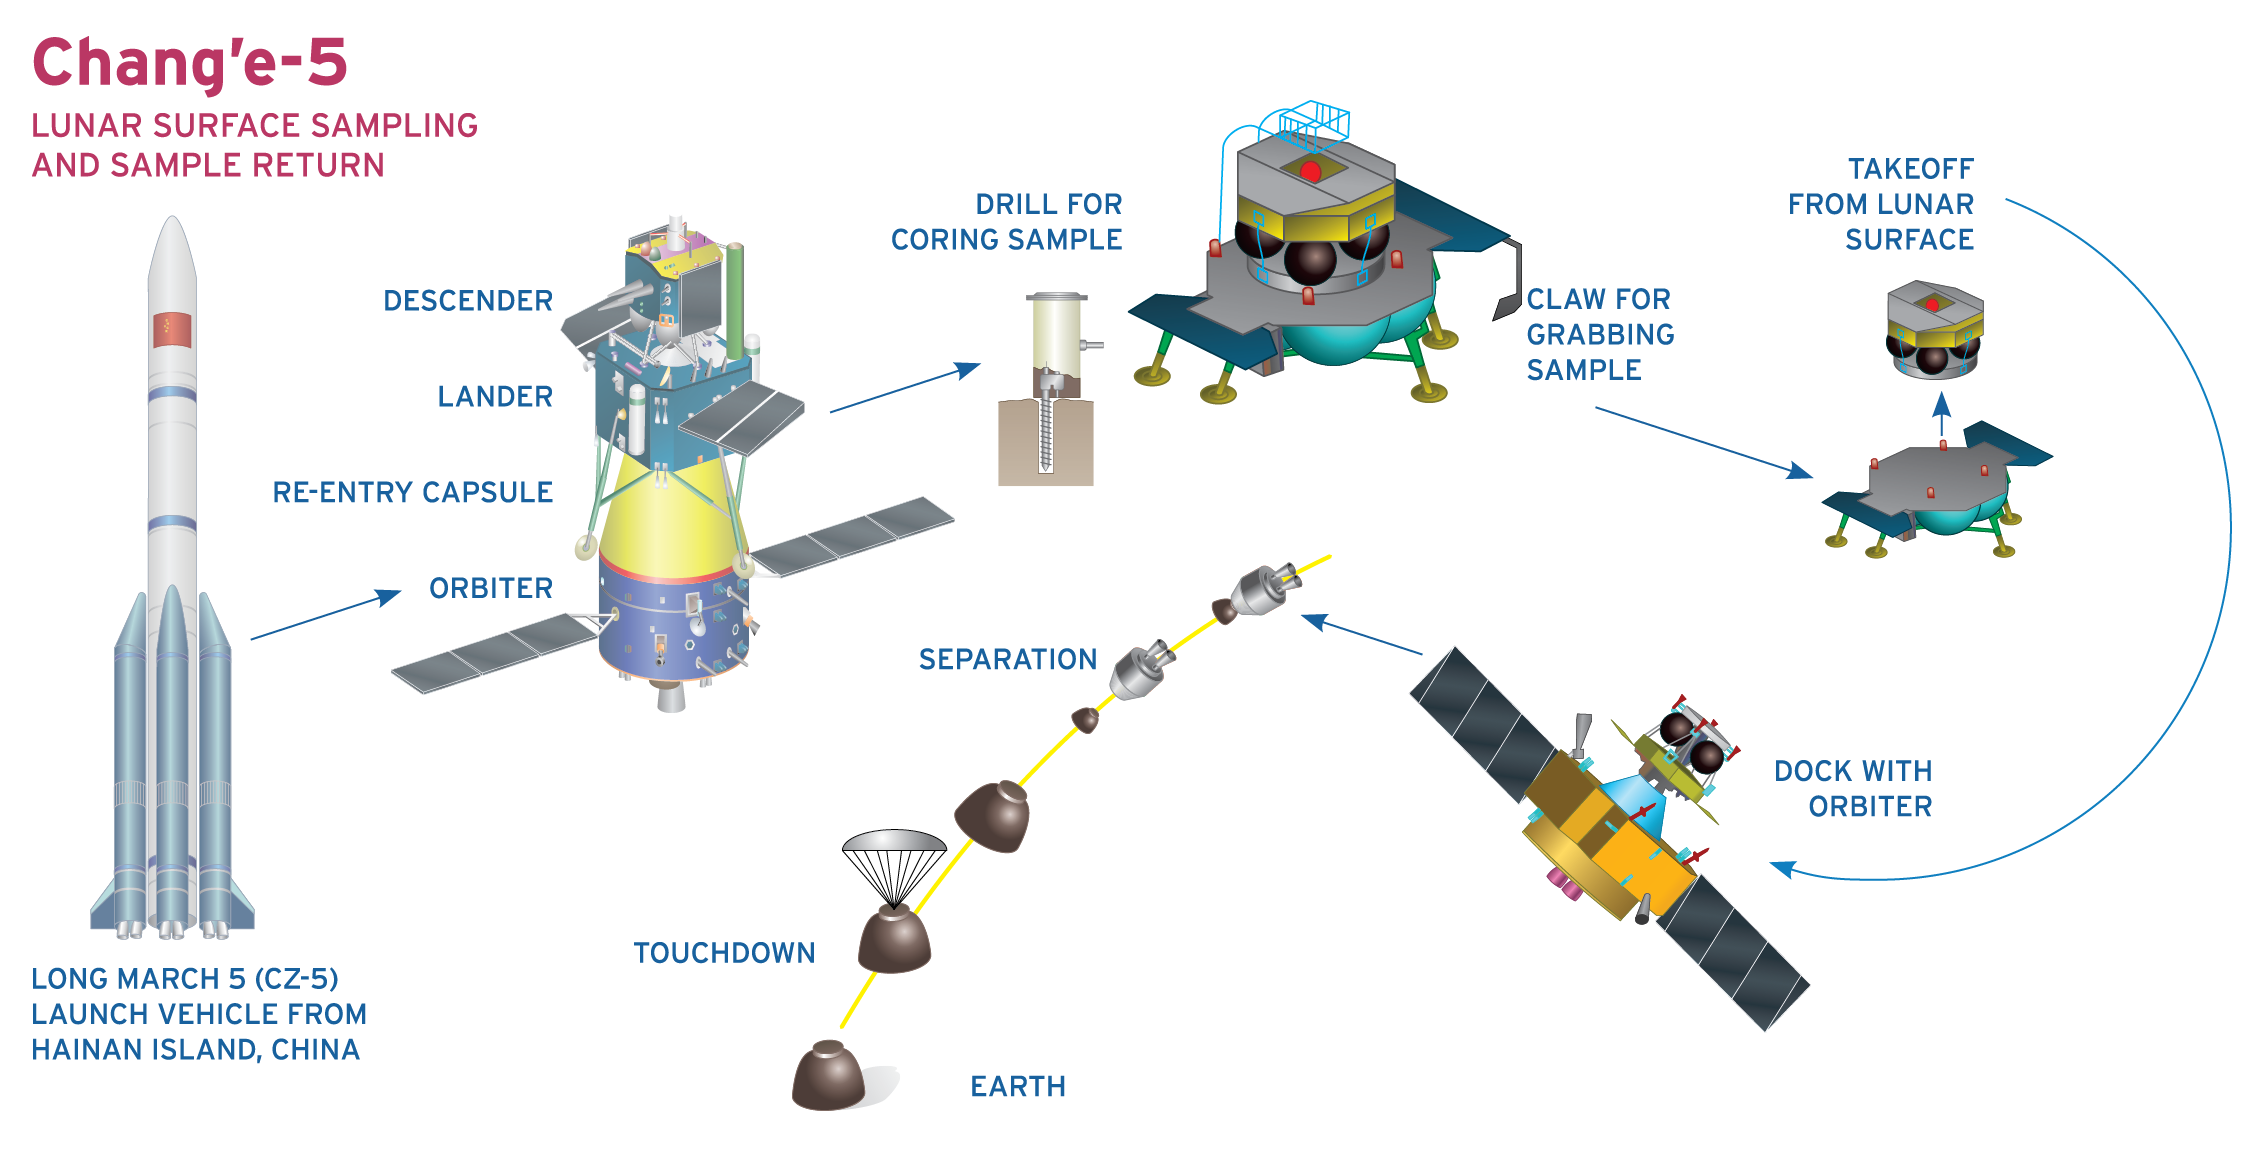 Chang'e 5 Moon sample return mission profile (Credit: The Planetary Society)